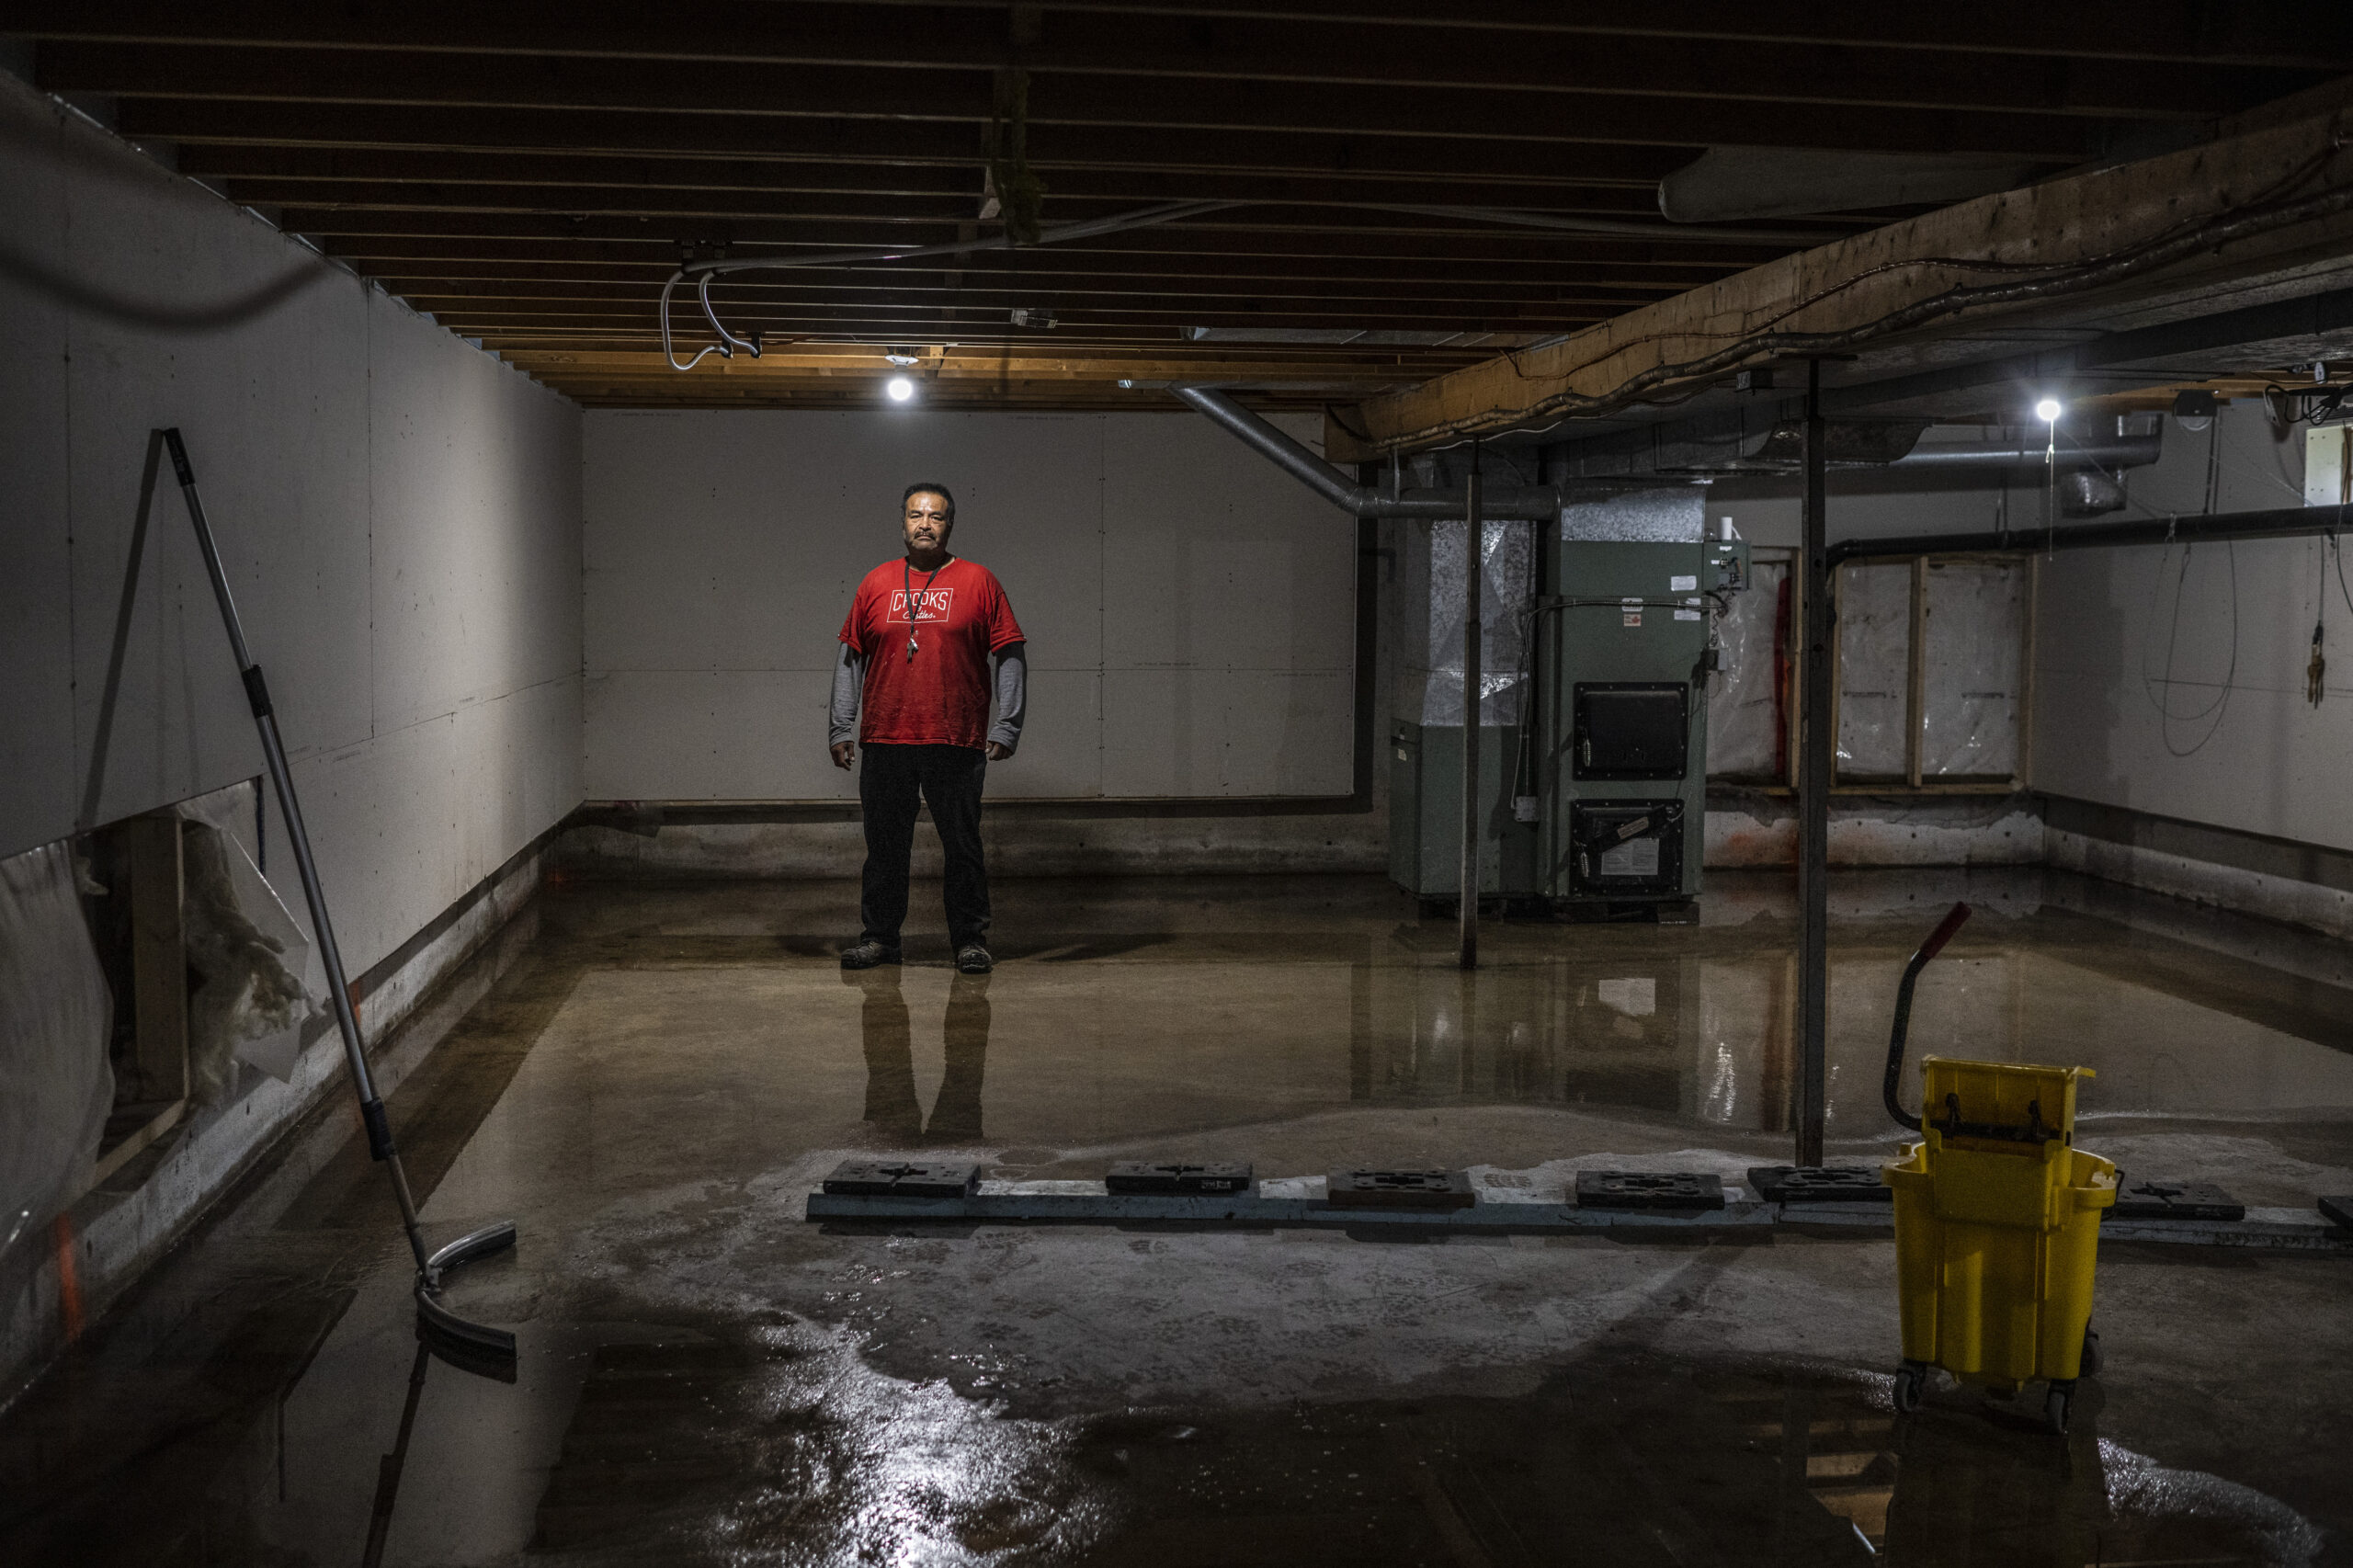 A man in a red shirt stands under a single lit bulb in a dark basement with water covering the floor. A long-armed, curved squeegee leans against the wall in the foreground